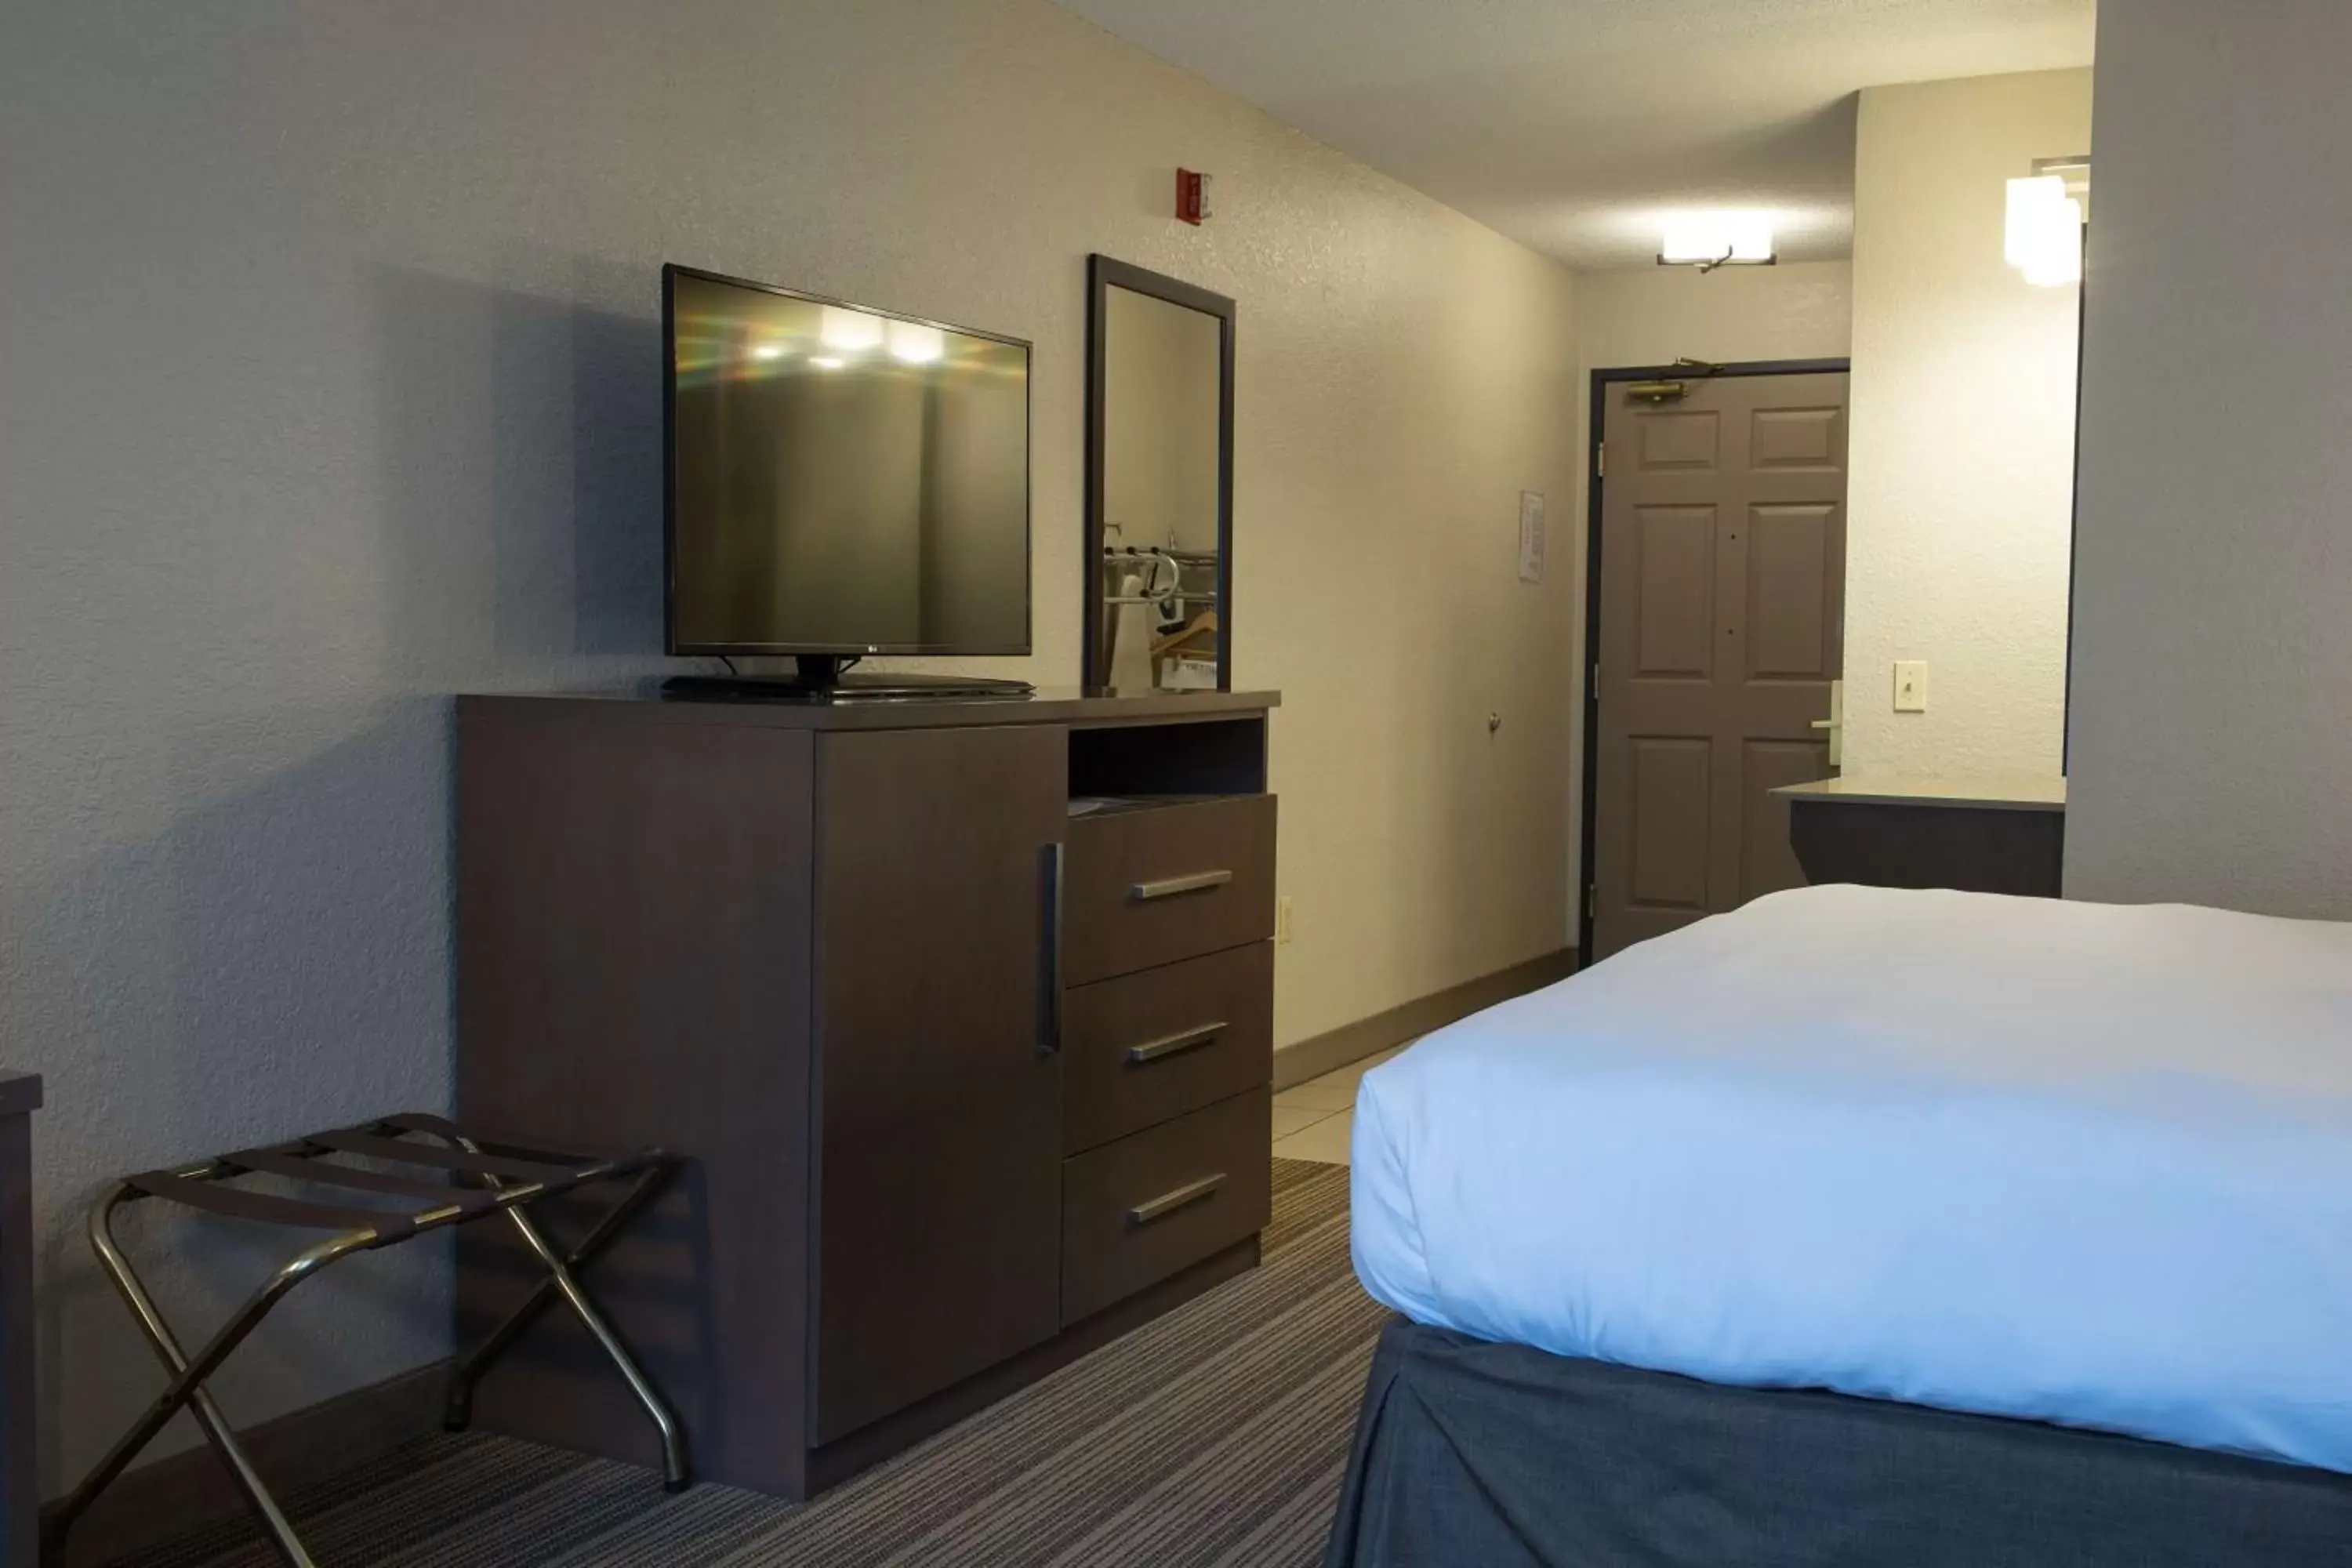 Bathroom, Bed in Country Inn & Suites by Radisson, Platteville, WI